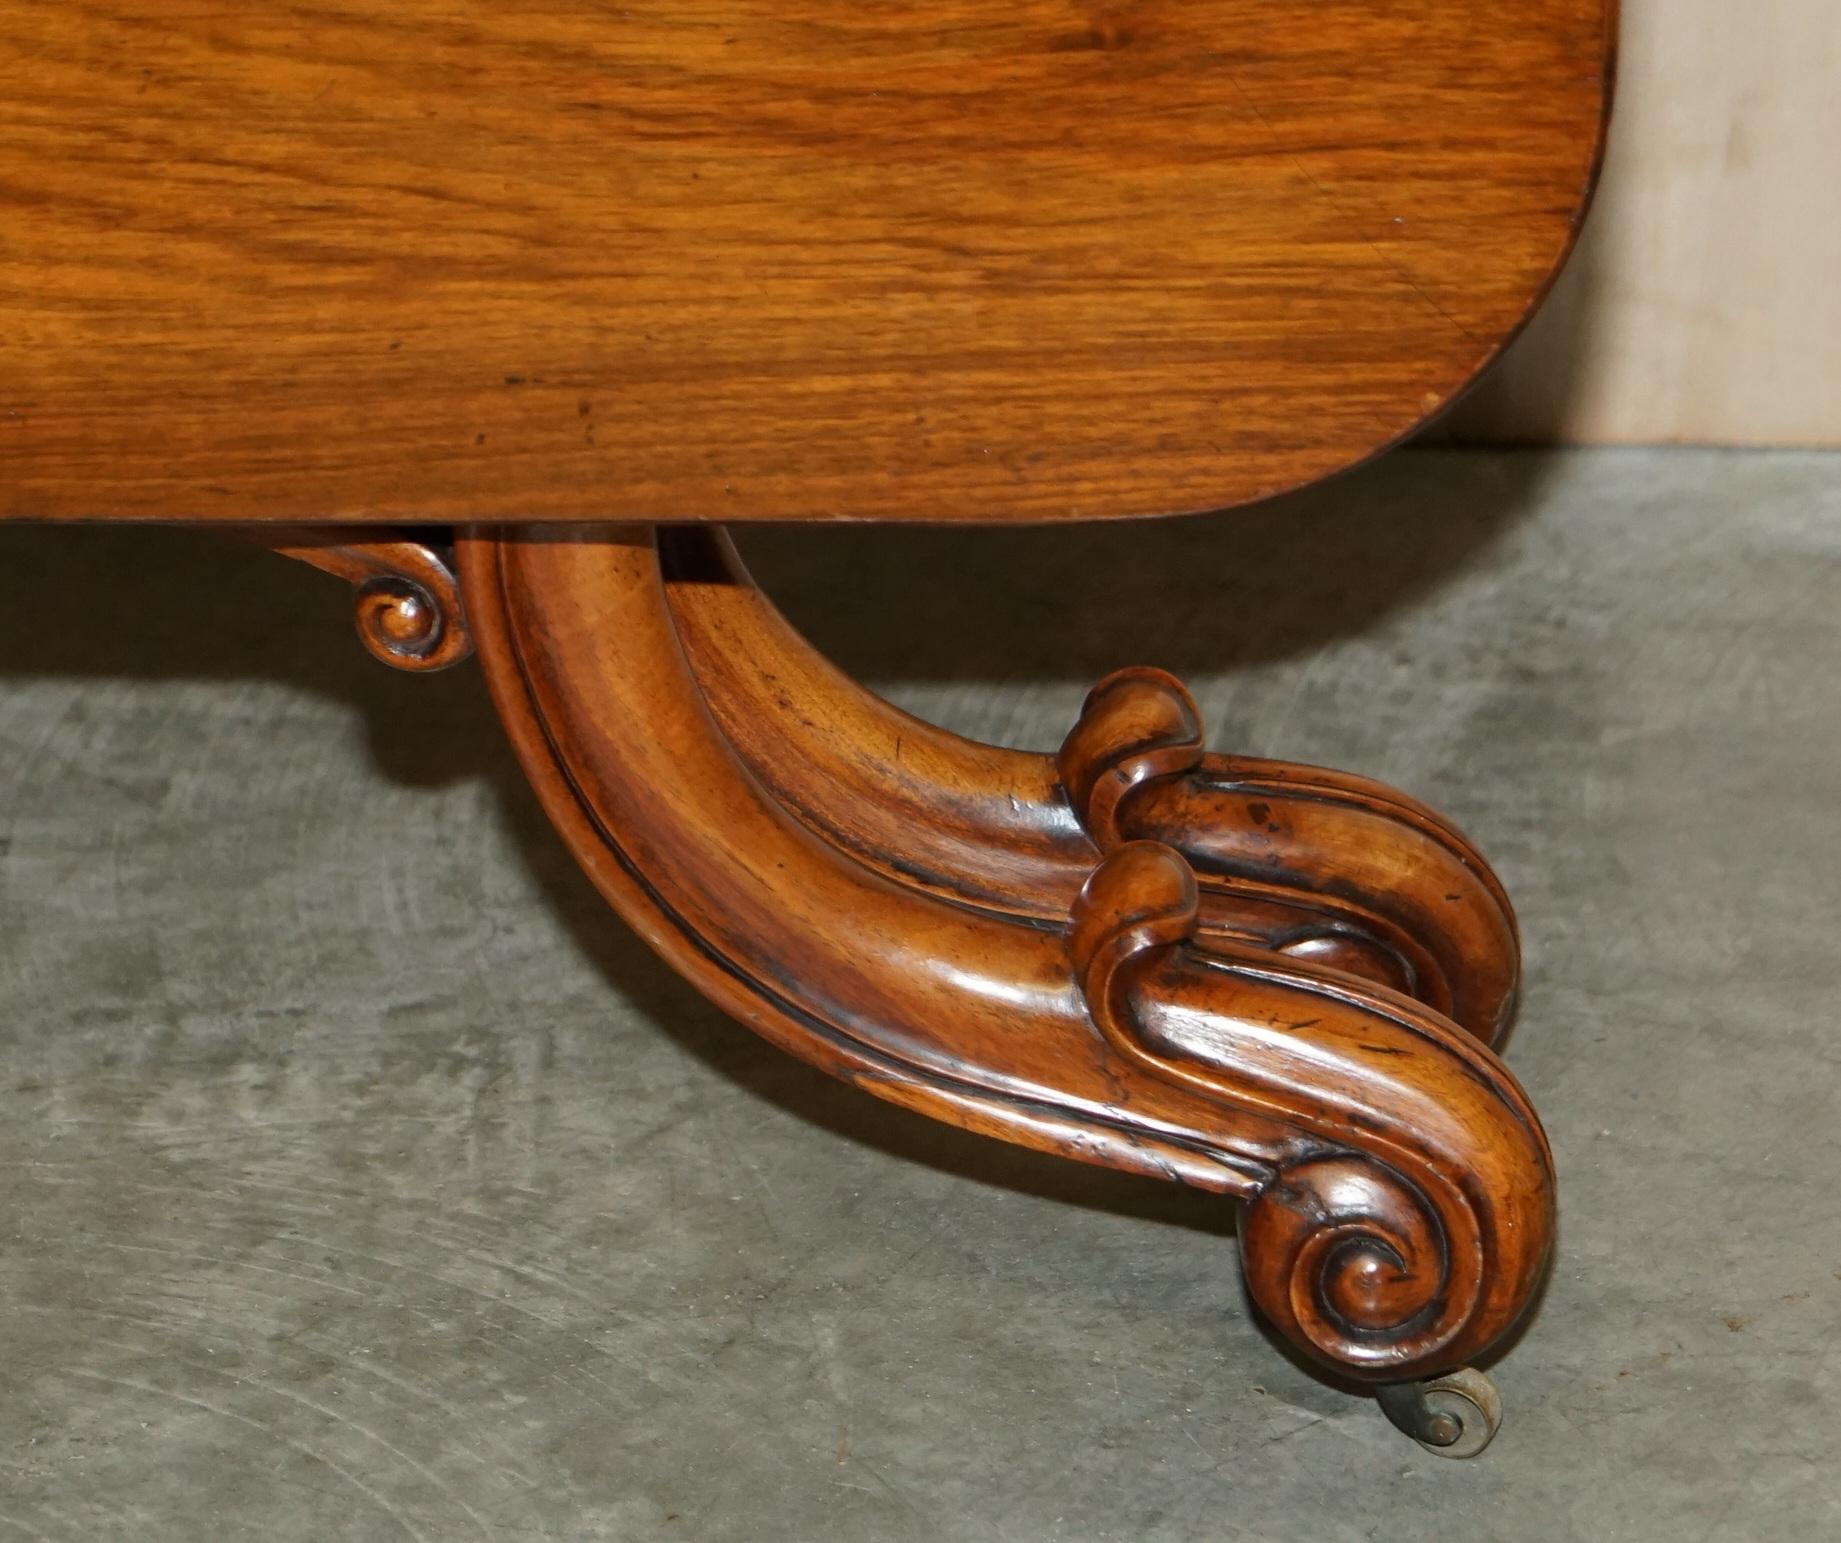 Hand-Crafted Antique Victorian Walnut Sutherland Folding Table with Exquisitely Carved Base